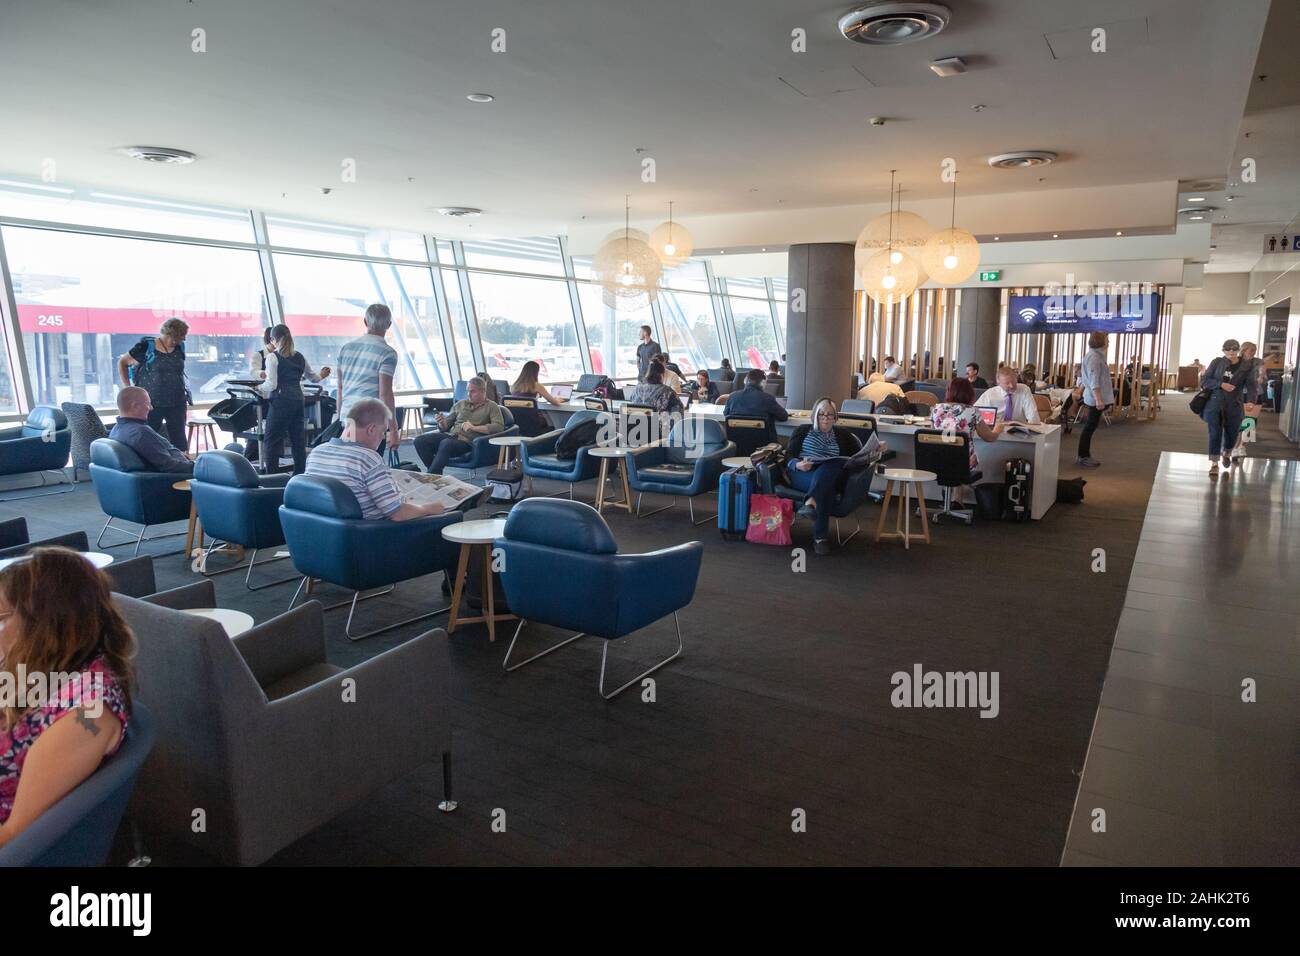 Sydney airport, passengers in the departures area of the terminal, Sydney Australia Stock Photo